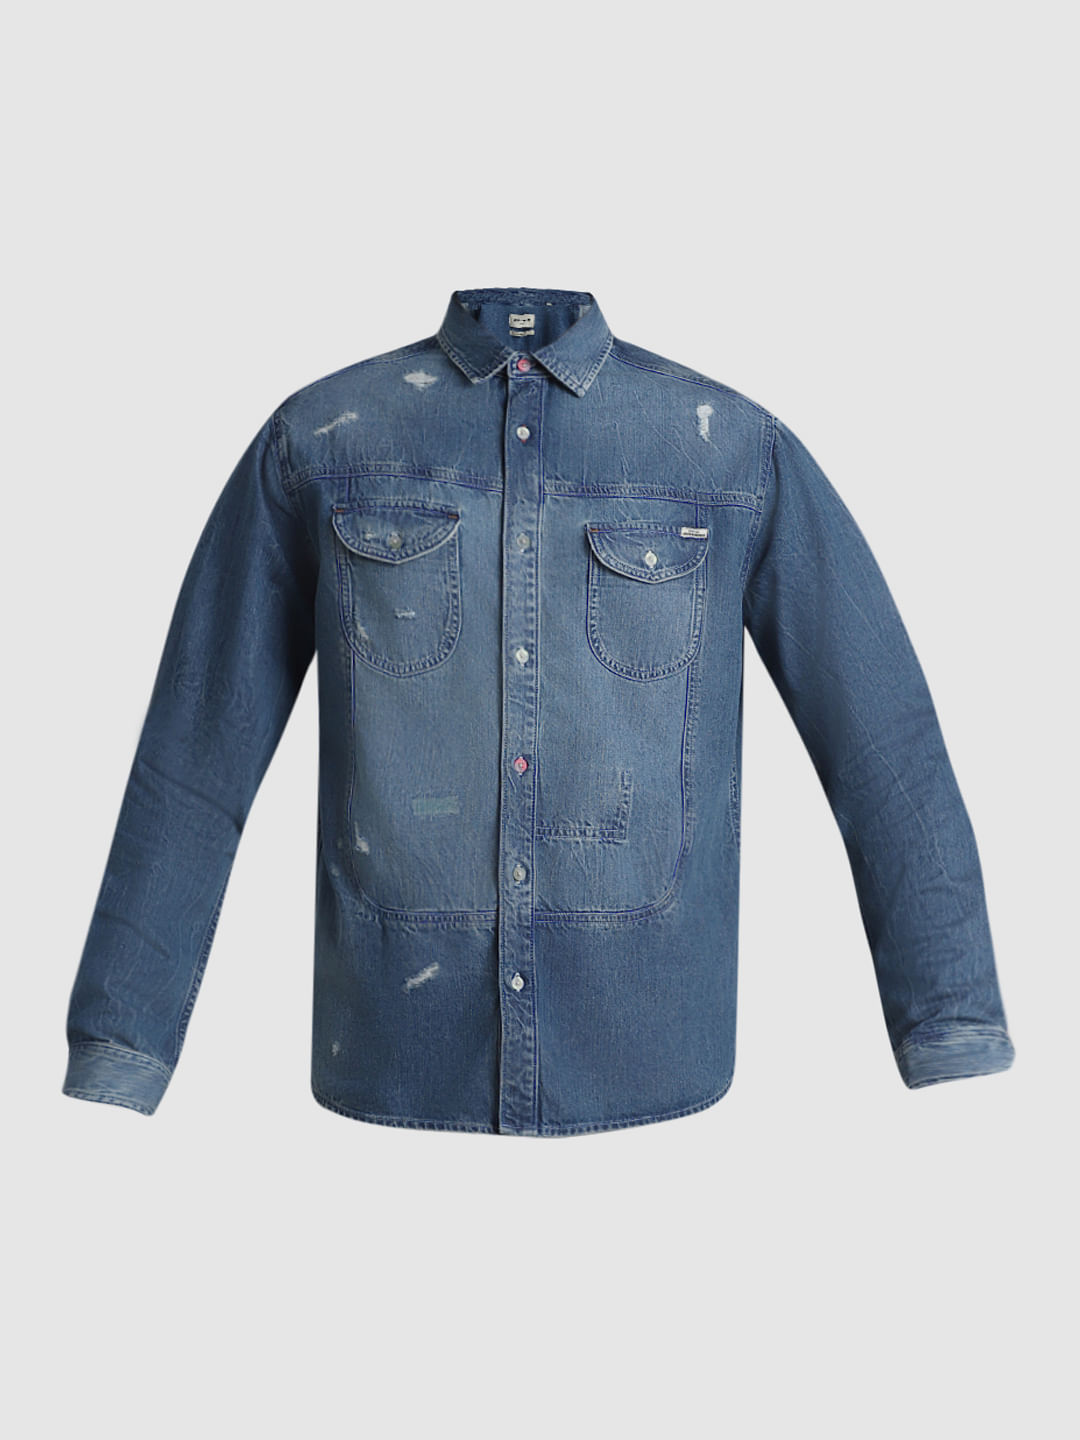 Shirt Collar Denim Top With Cutwork Embroidery | Etiquette Apparel